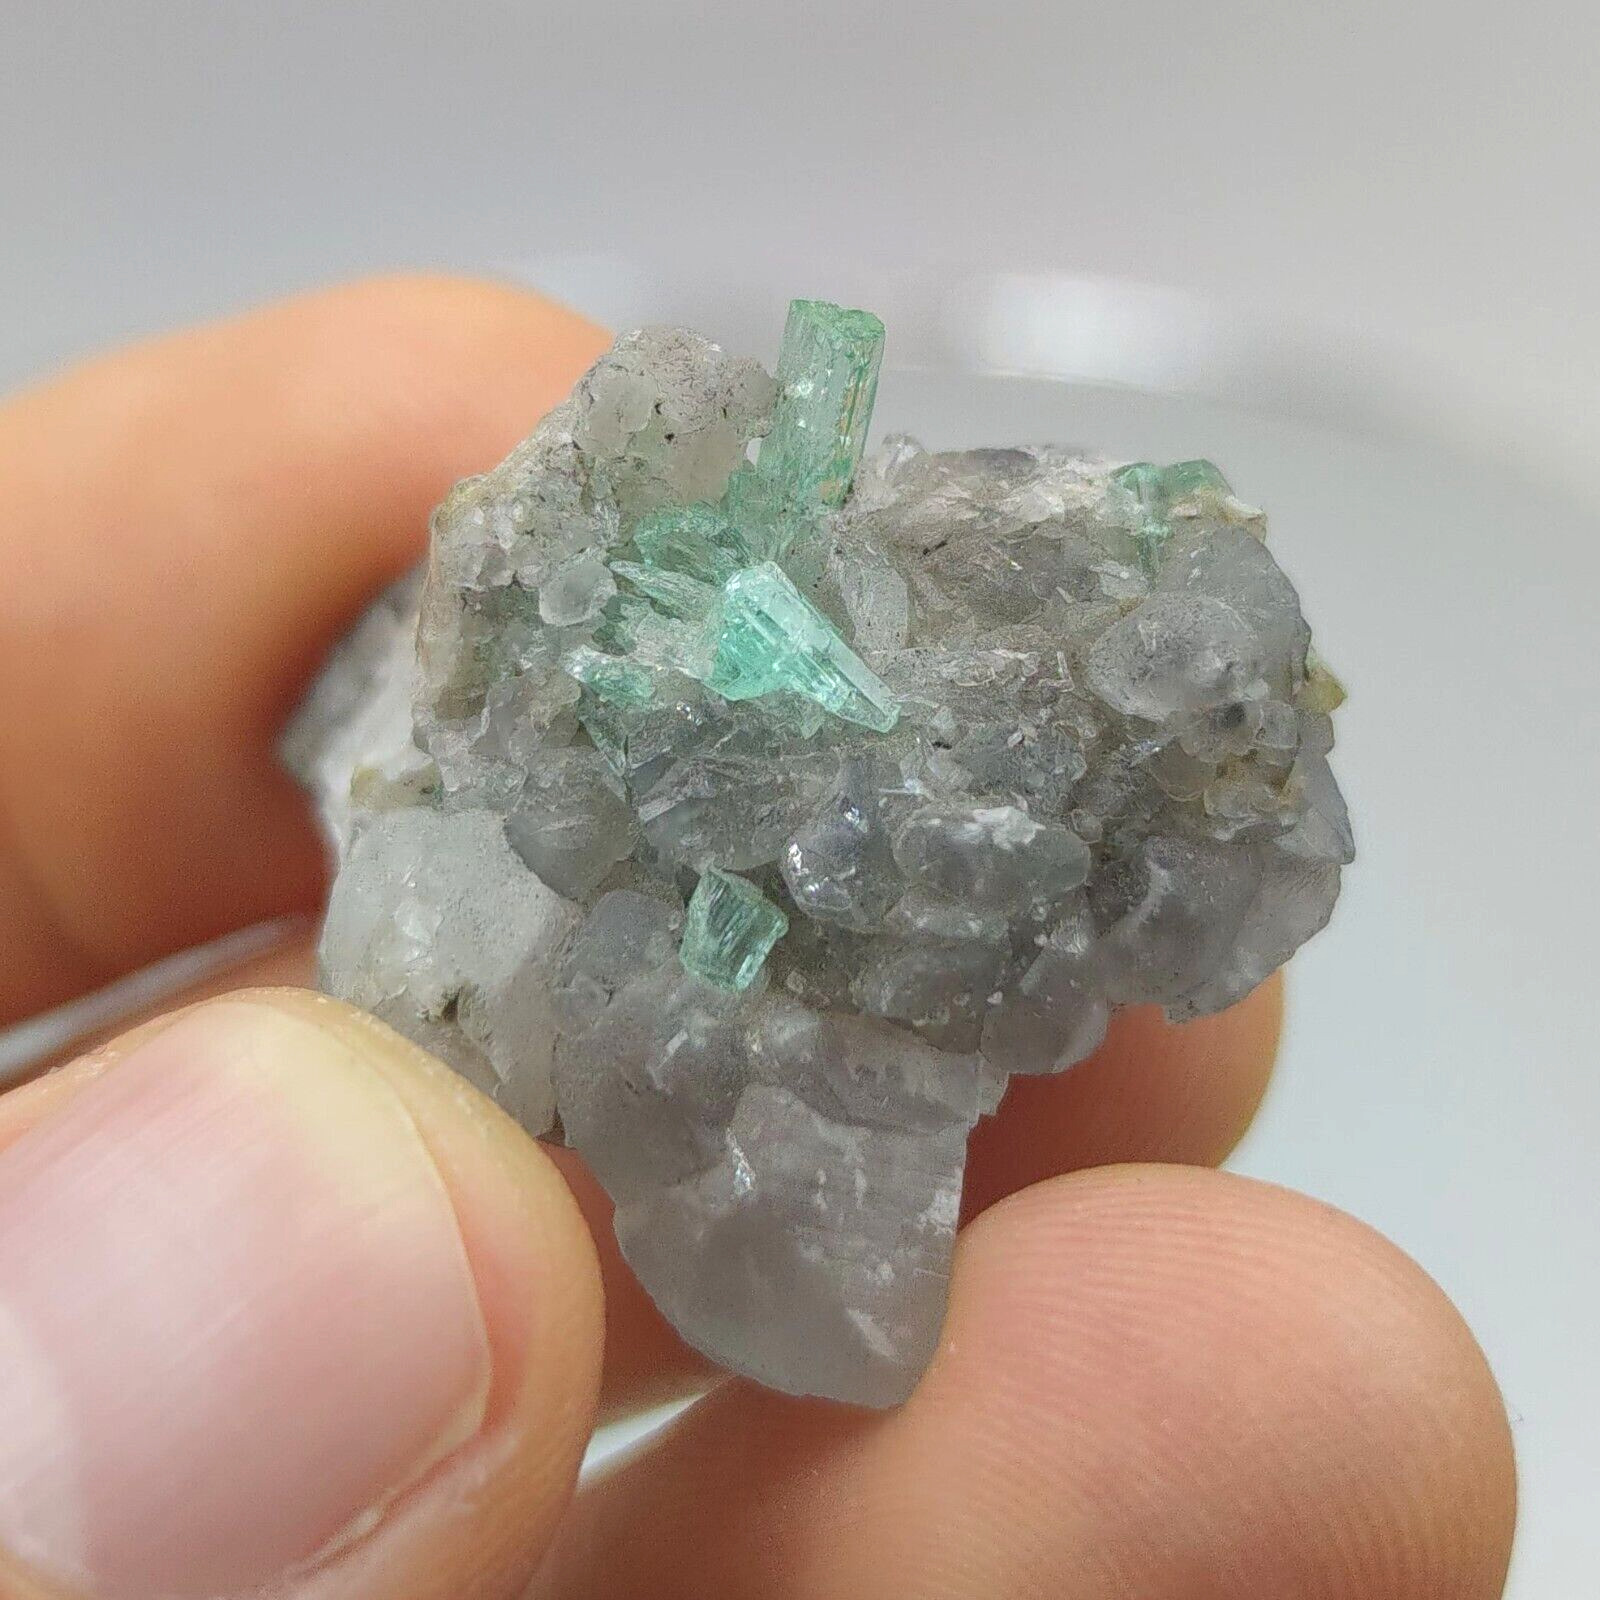 VERY CLEAR NATURAL EMERALD CRYSTAL ON MATRIX  FROM MUZO COLOMBIA 12.3 grams